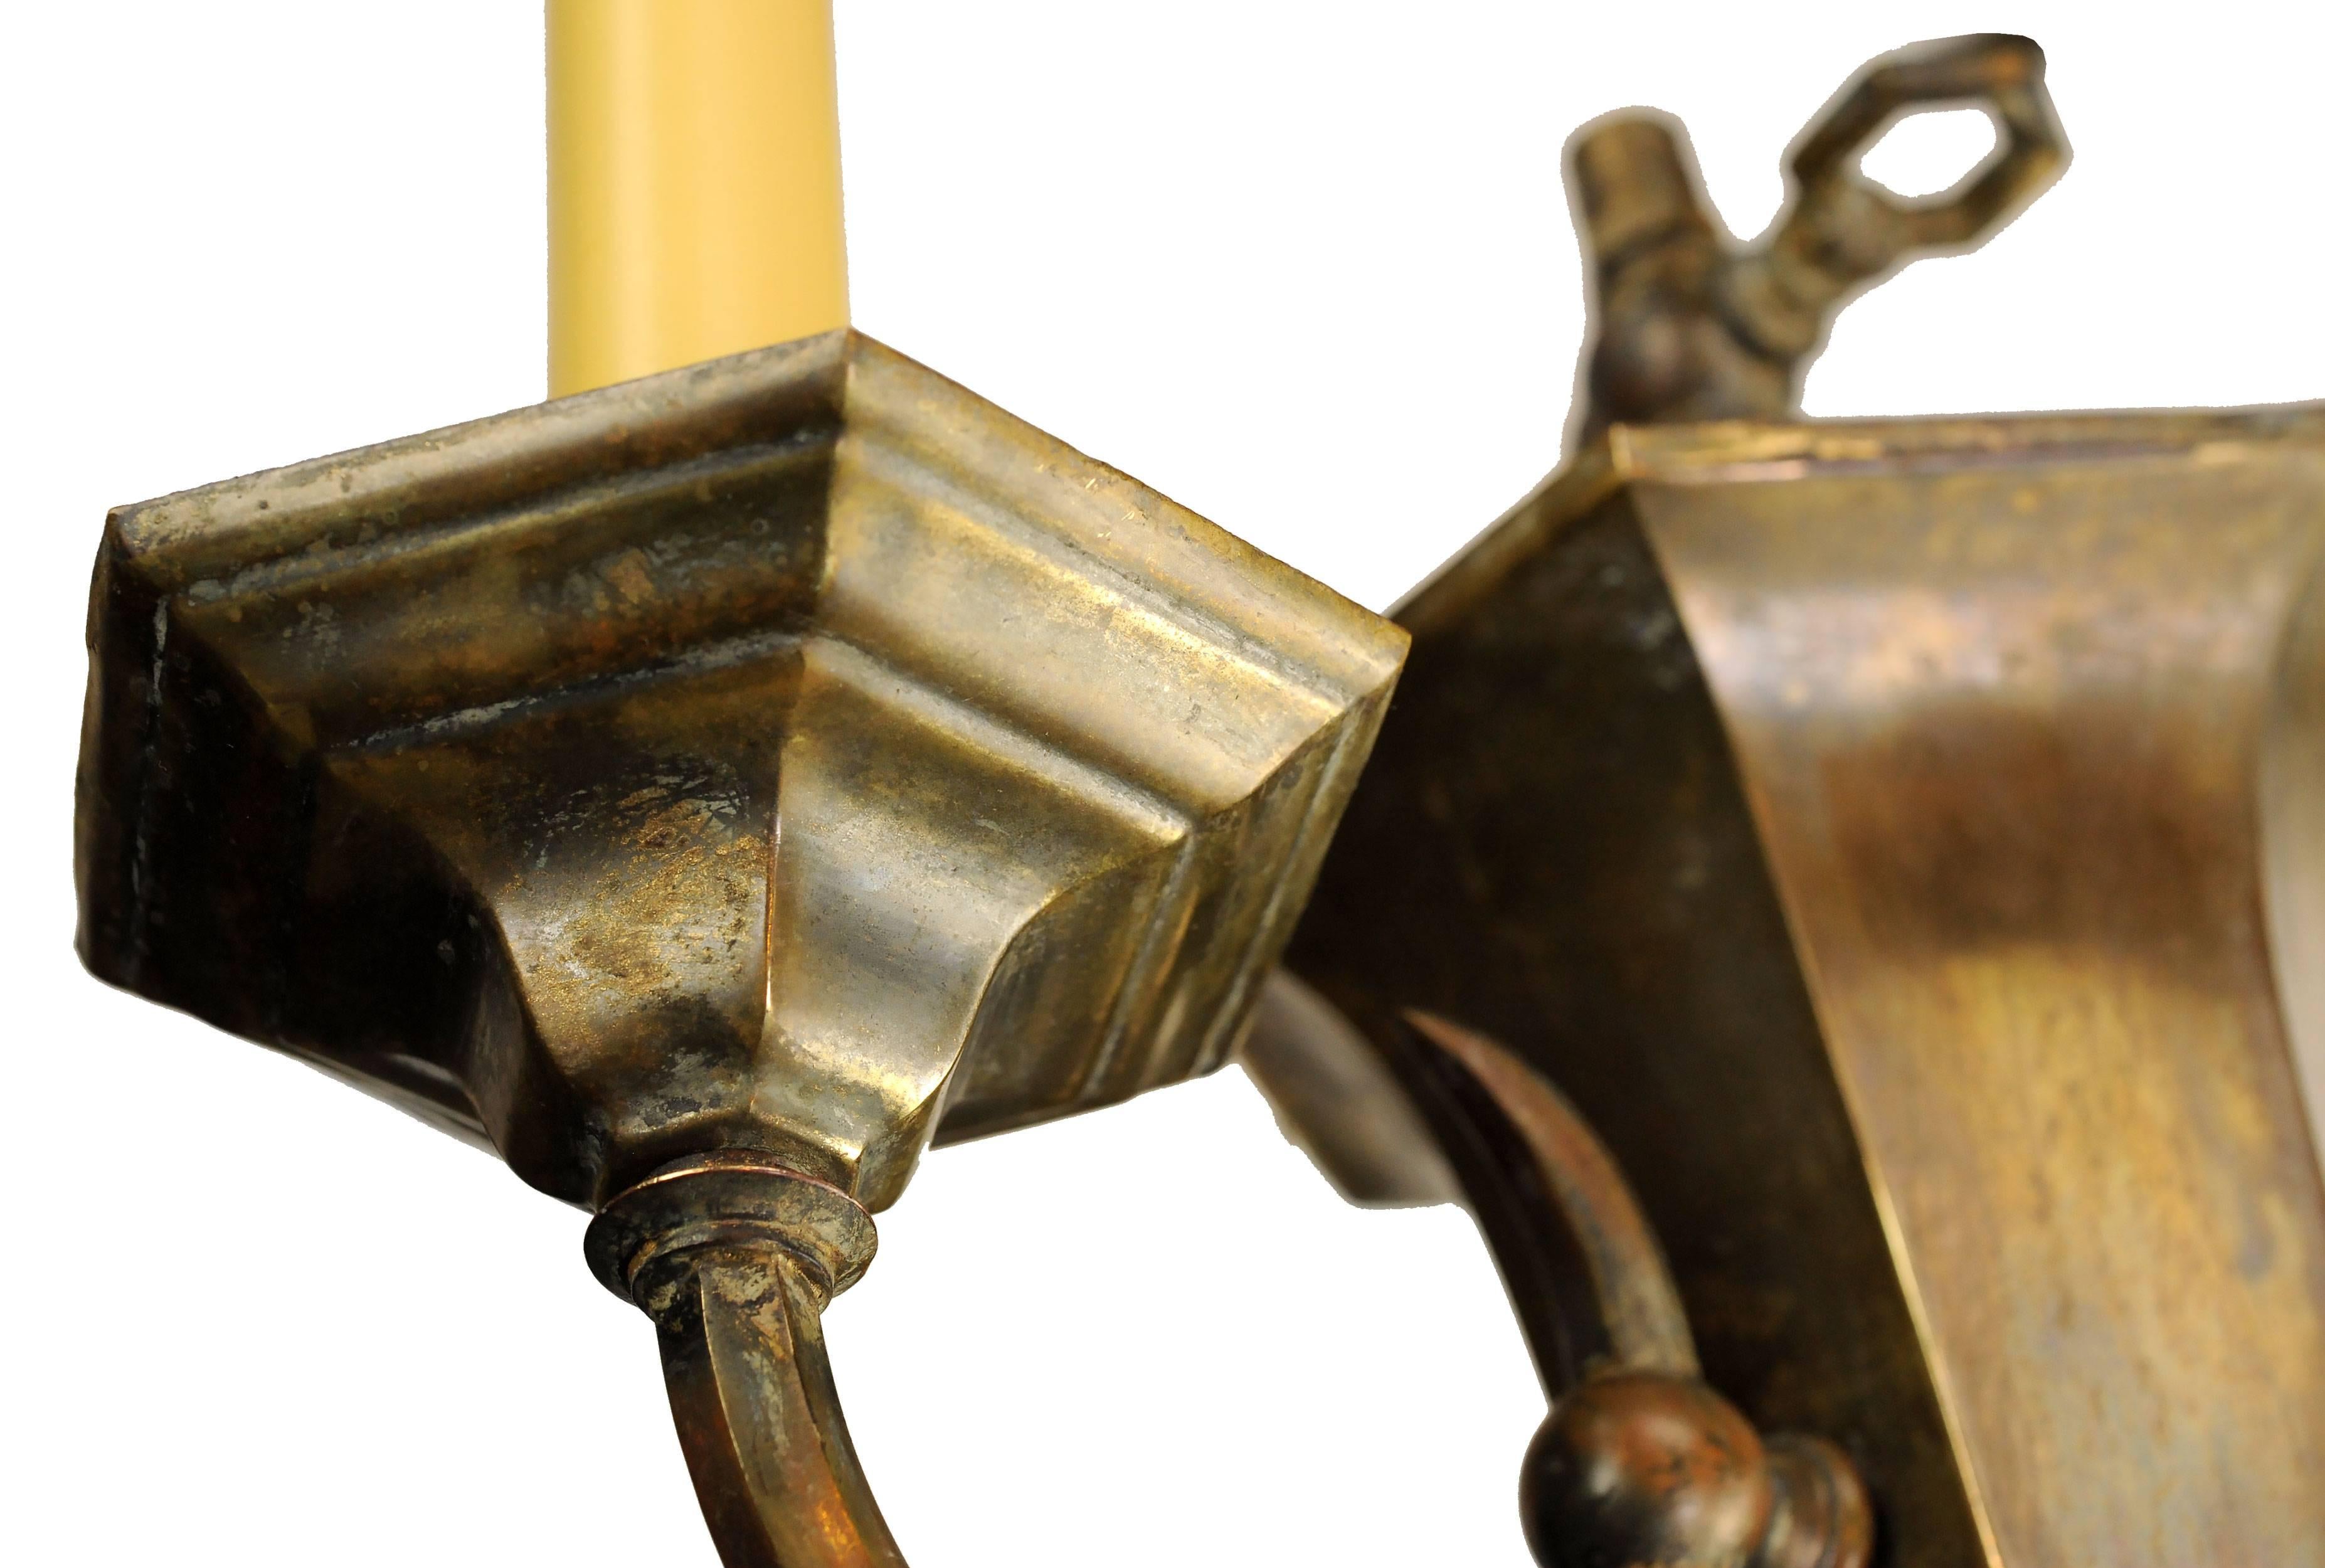 Stunning brass two candle gas/electric sconce with beautiful, mottled patina. Refined and elegant, these sconces will make a statement in any setting. 

Finish: Original
Two candelabra sockets

We find that early antique lighting was designed